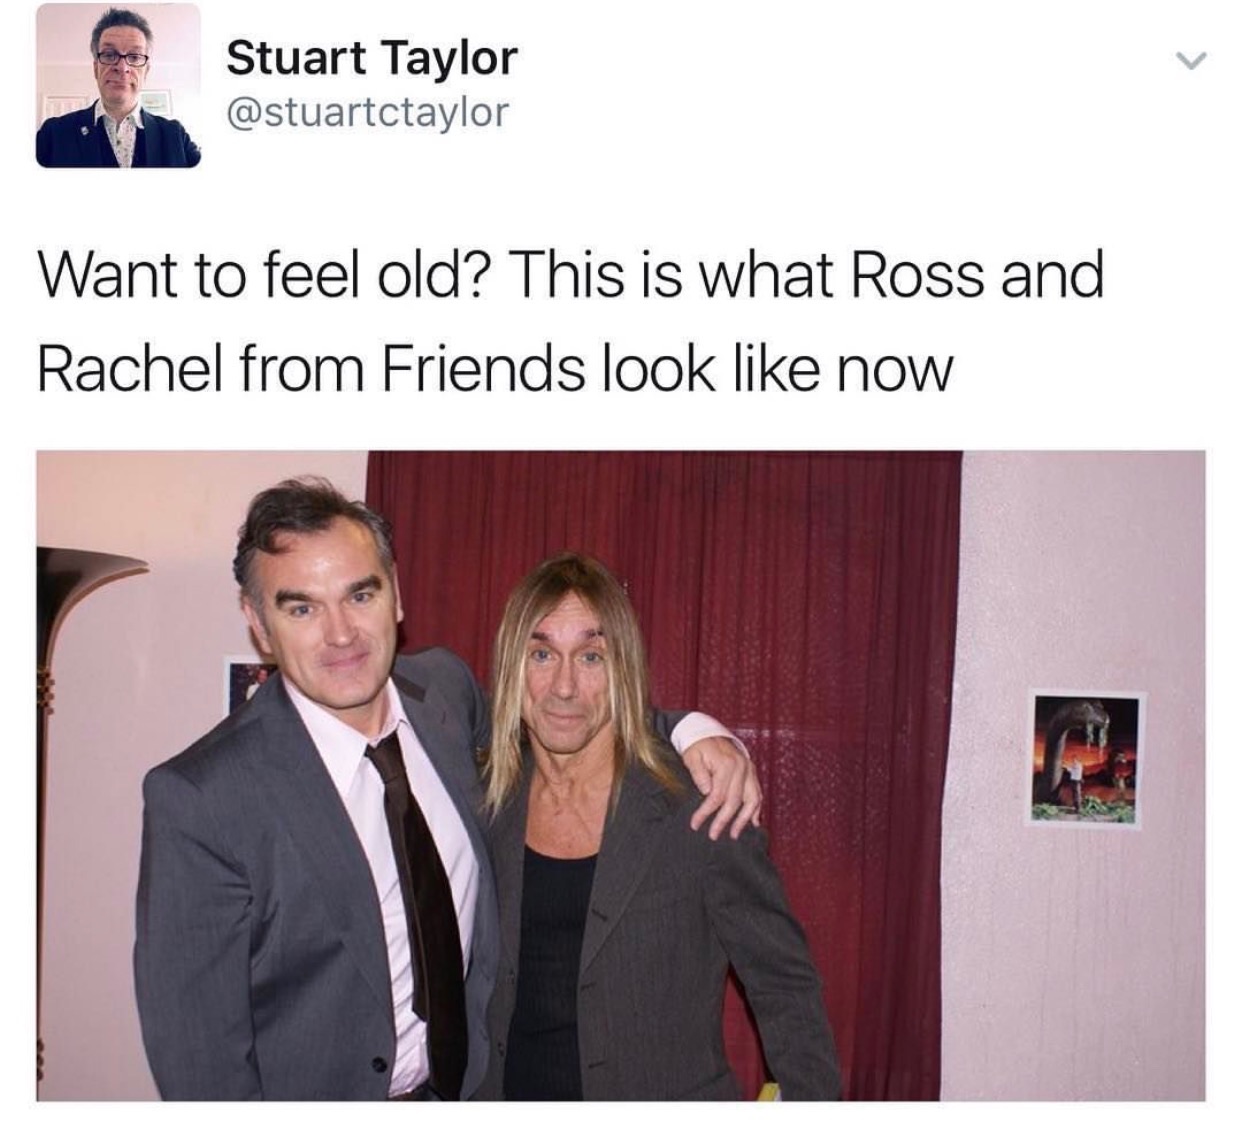 morrissey iggy pop - Stuart Taylor Want to feel old? This is what Ross and Rachel from Friends look now